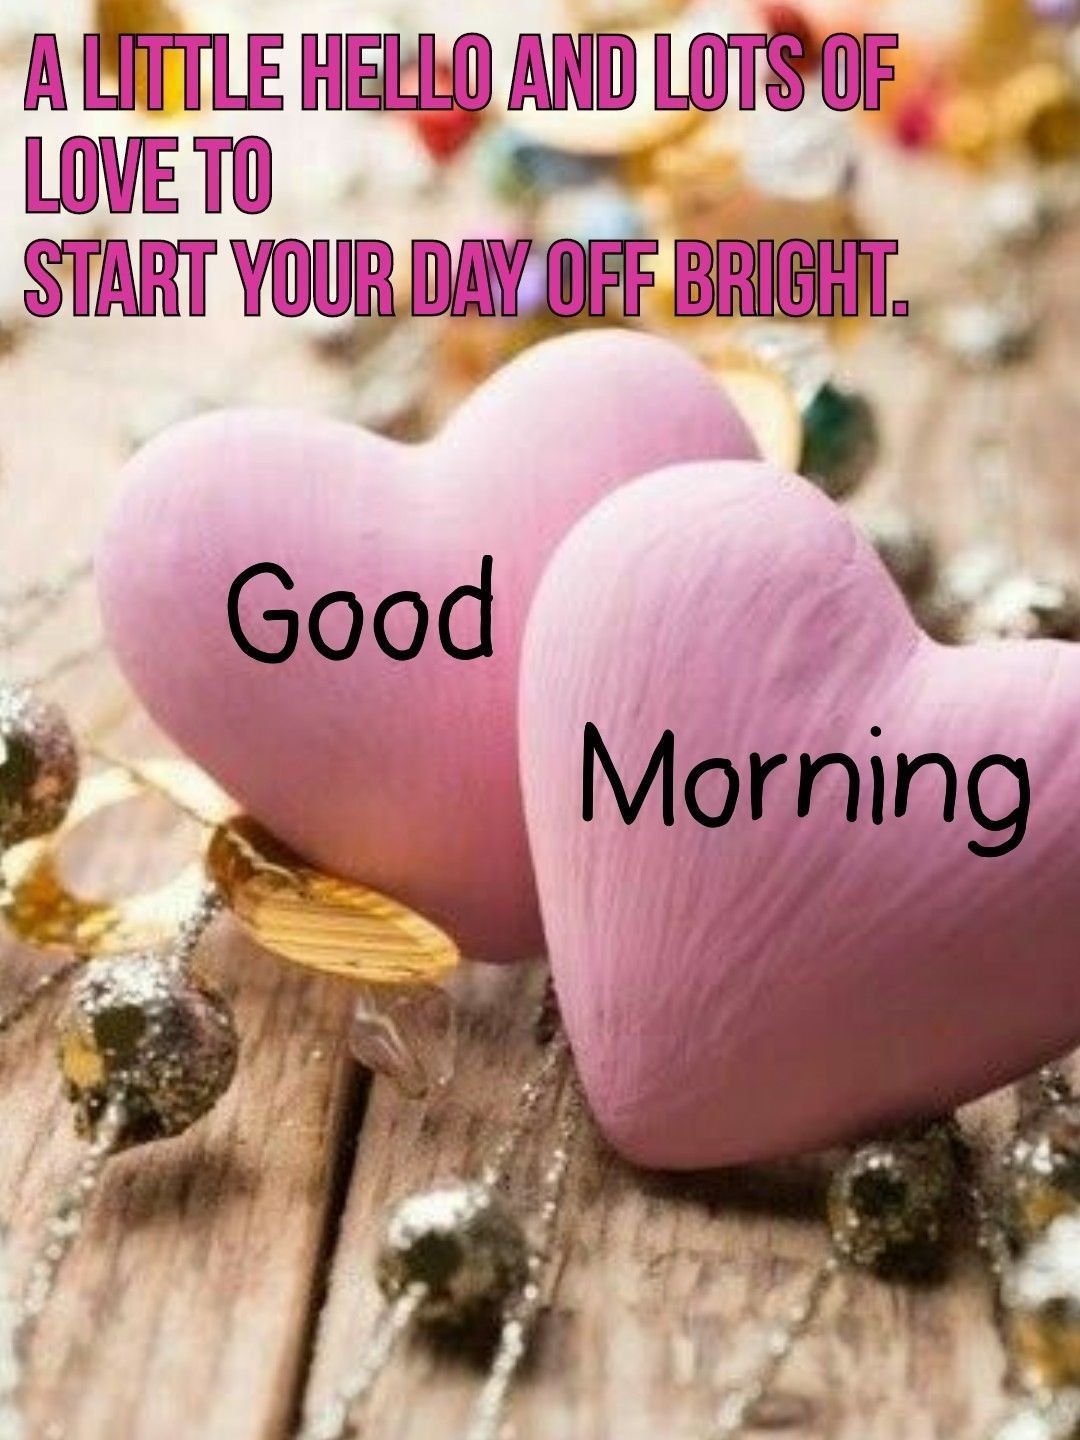 Good Morning Messages To Make Your Crush Fall In Love